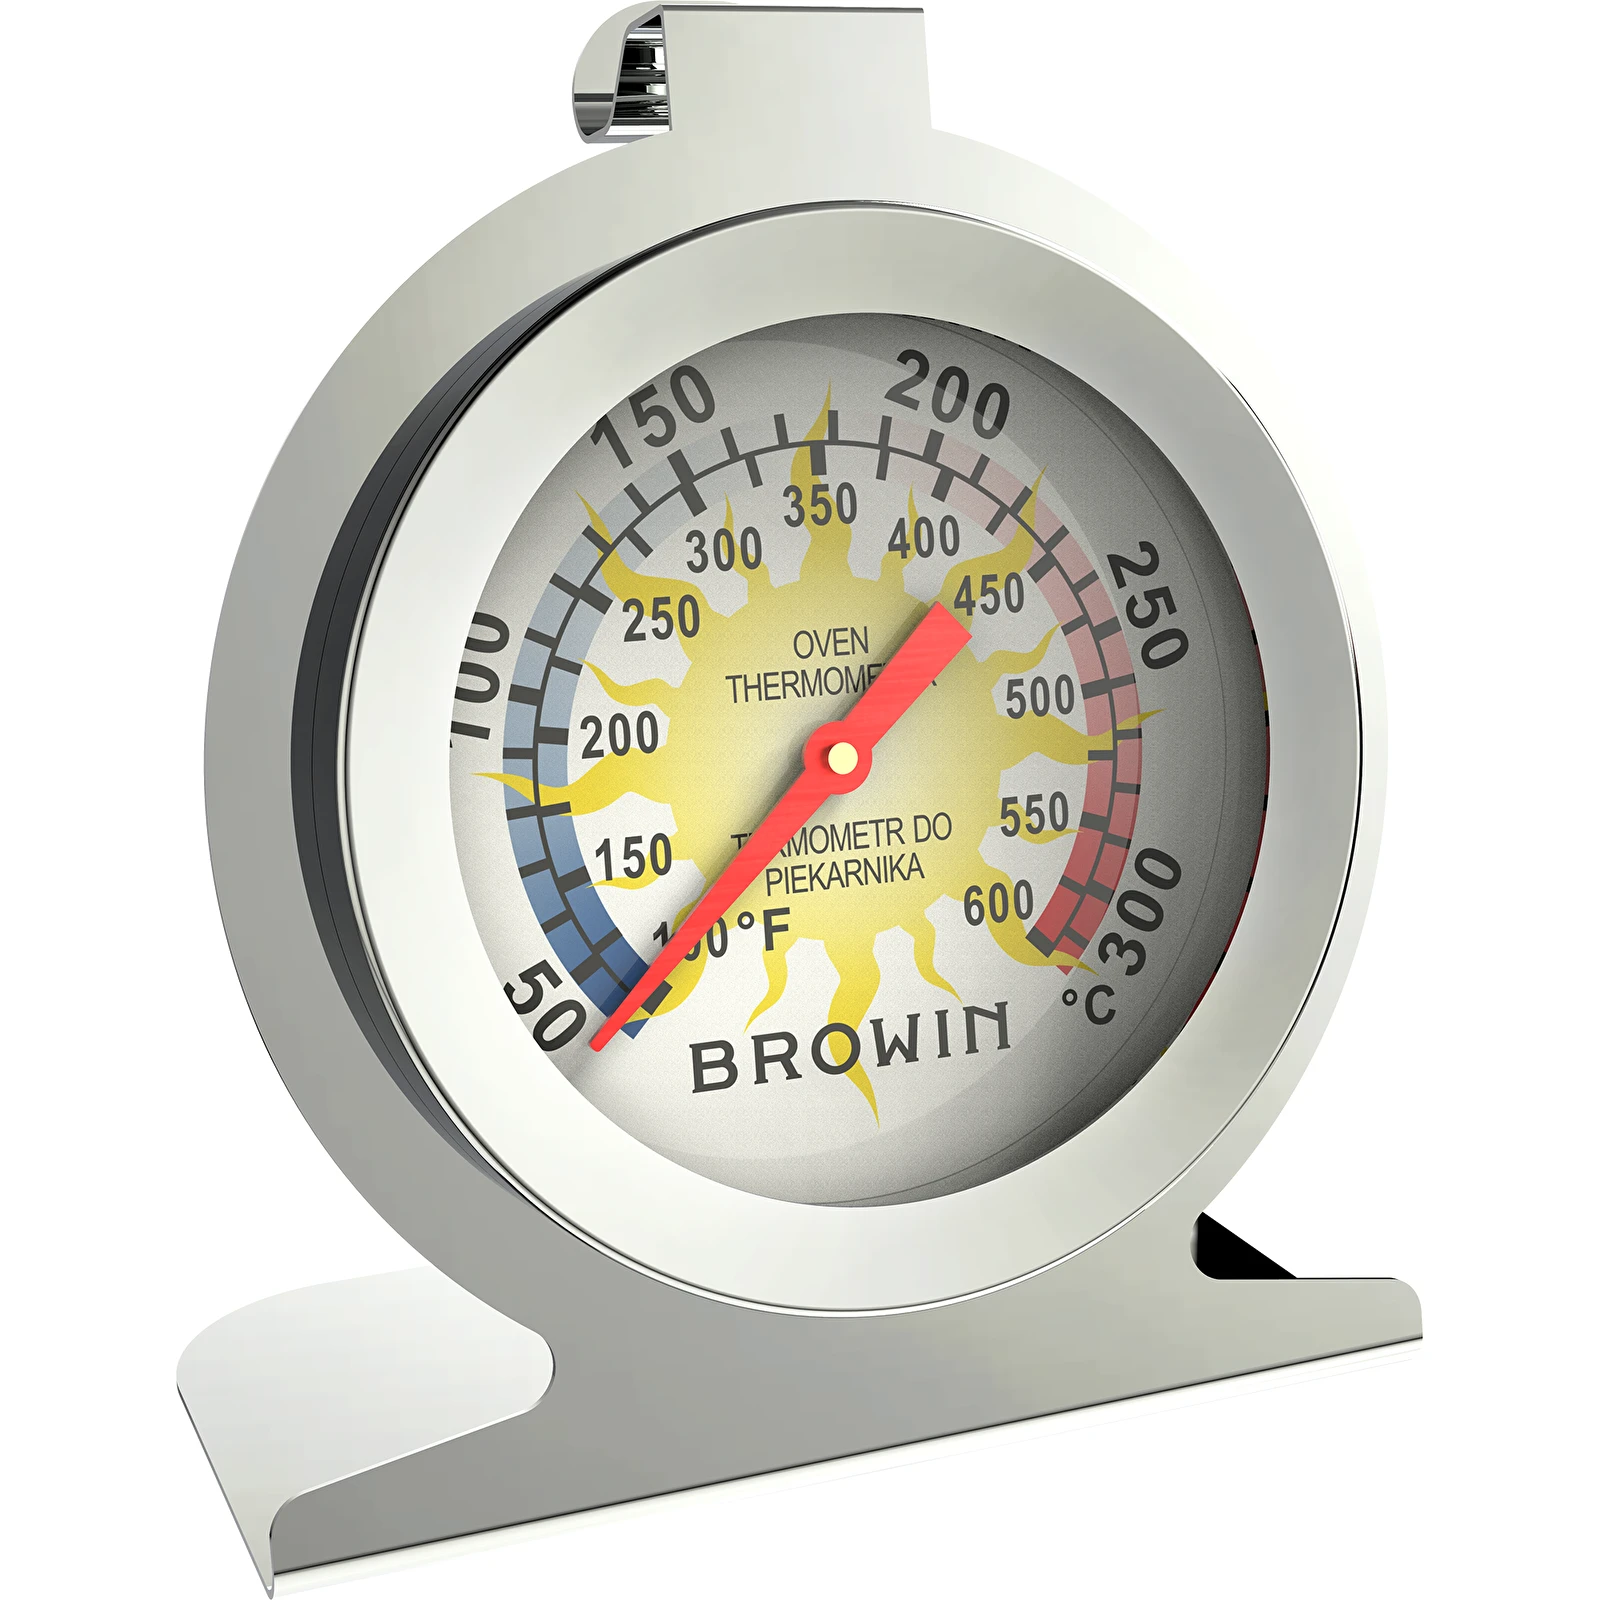 https://browin.com/static/images/1600/kitchen-thermometer-for-oven-50-300-c-100800_1.webp